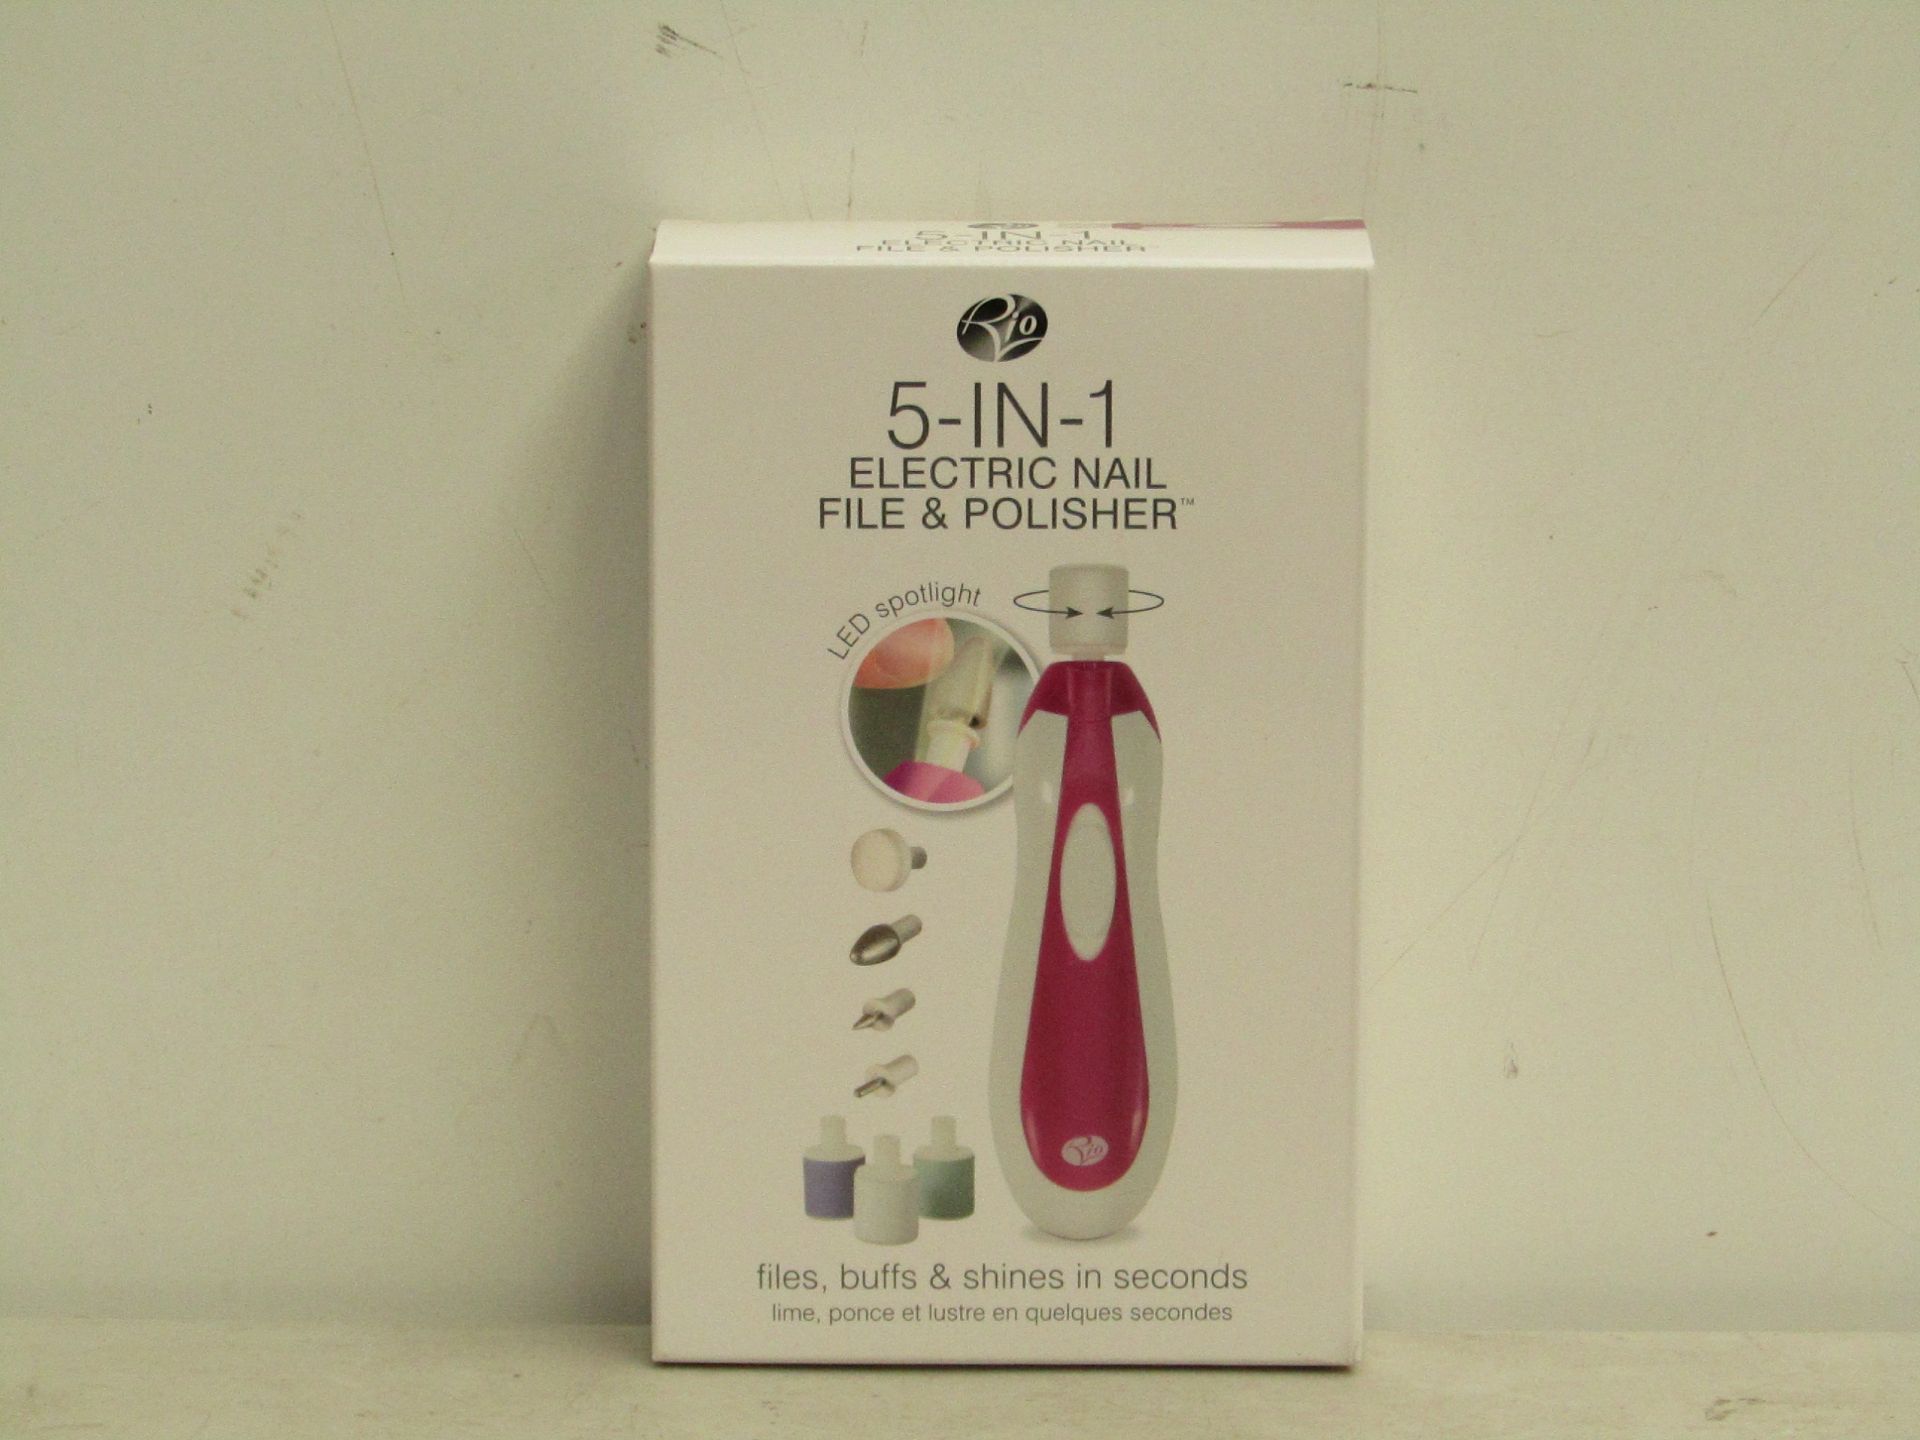 Rio 5-in-1 electric nail file & polisher. Brand new & boxed.